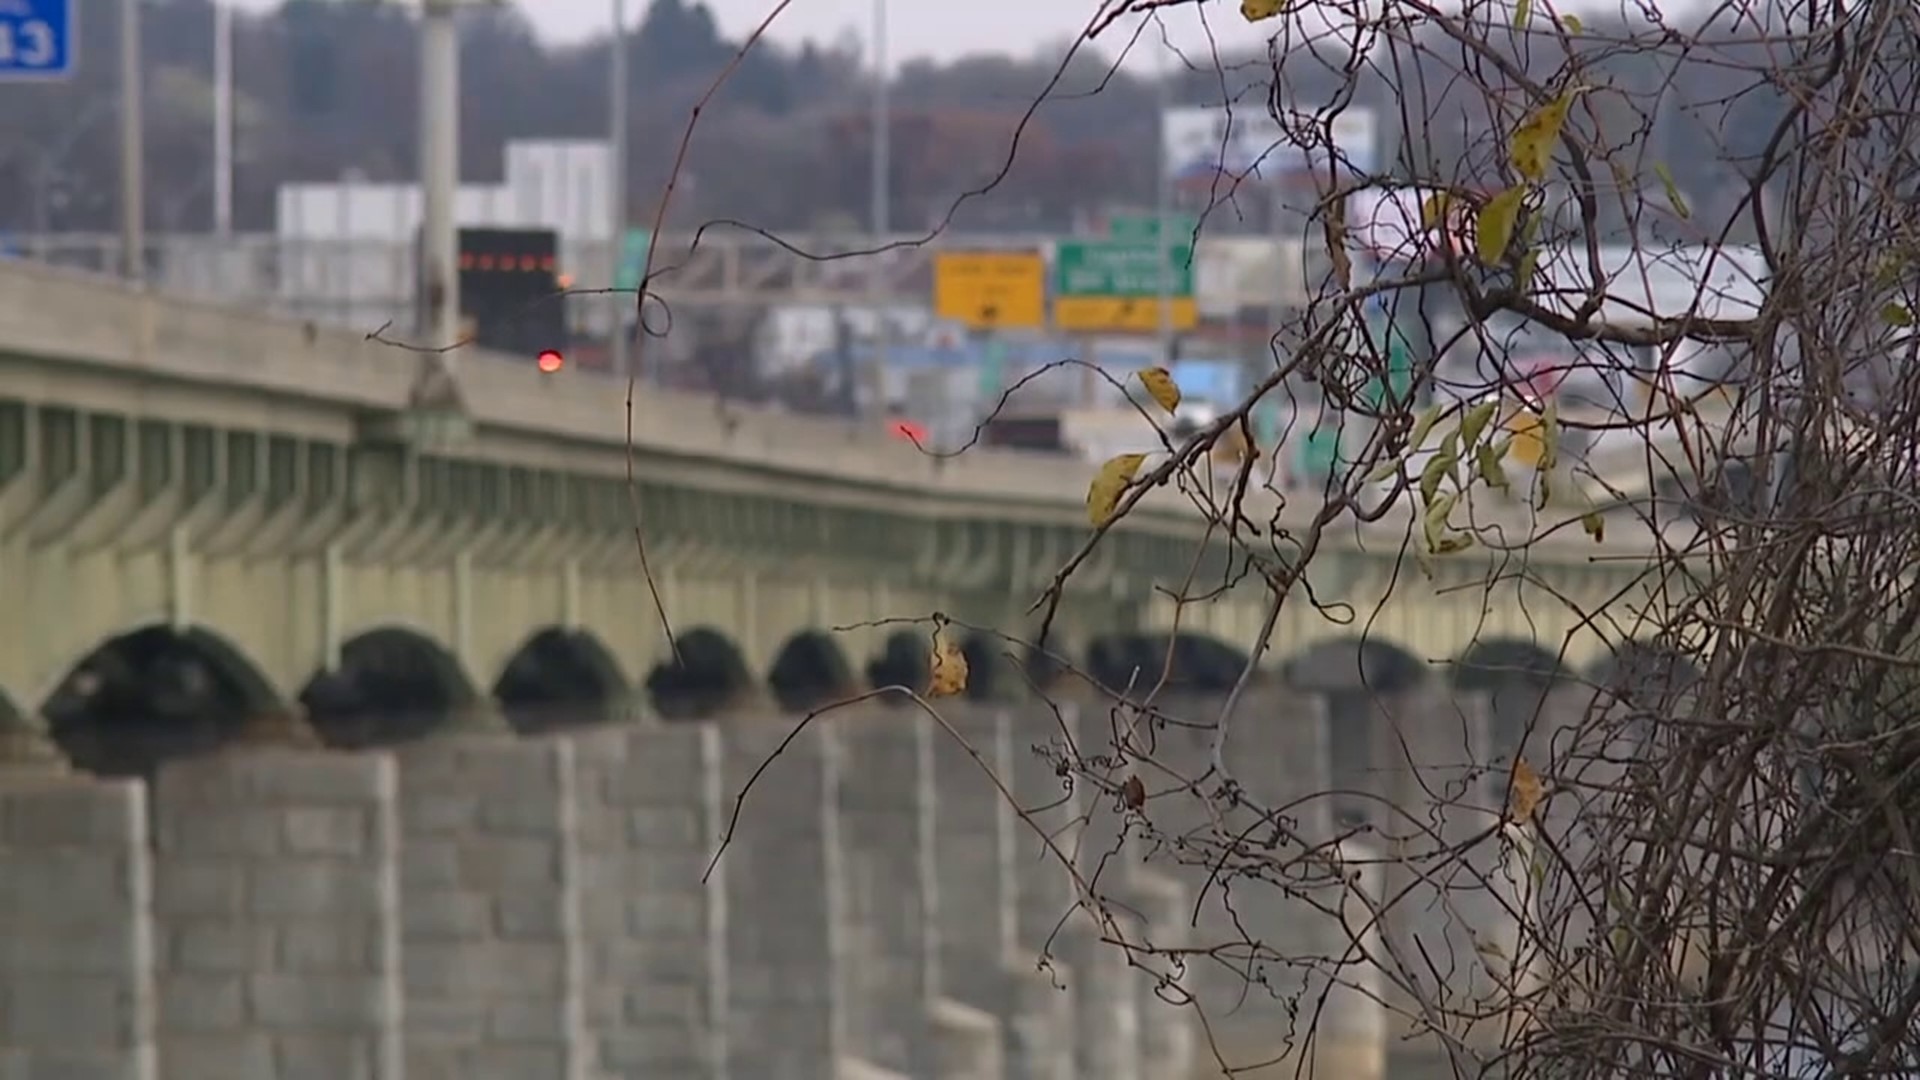 How safe are the bridges you drive on every day? People across the state are asking questions after Friday's collapse in Pittsburgh.